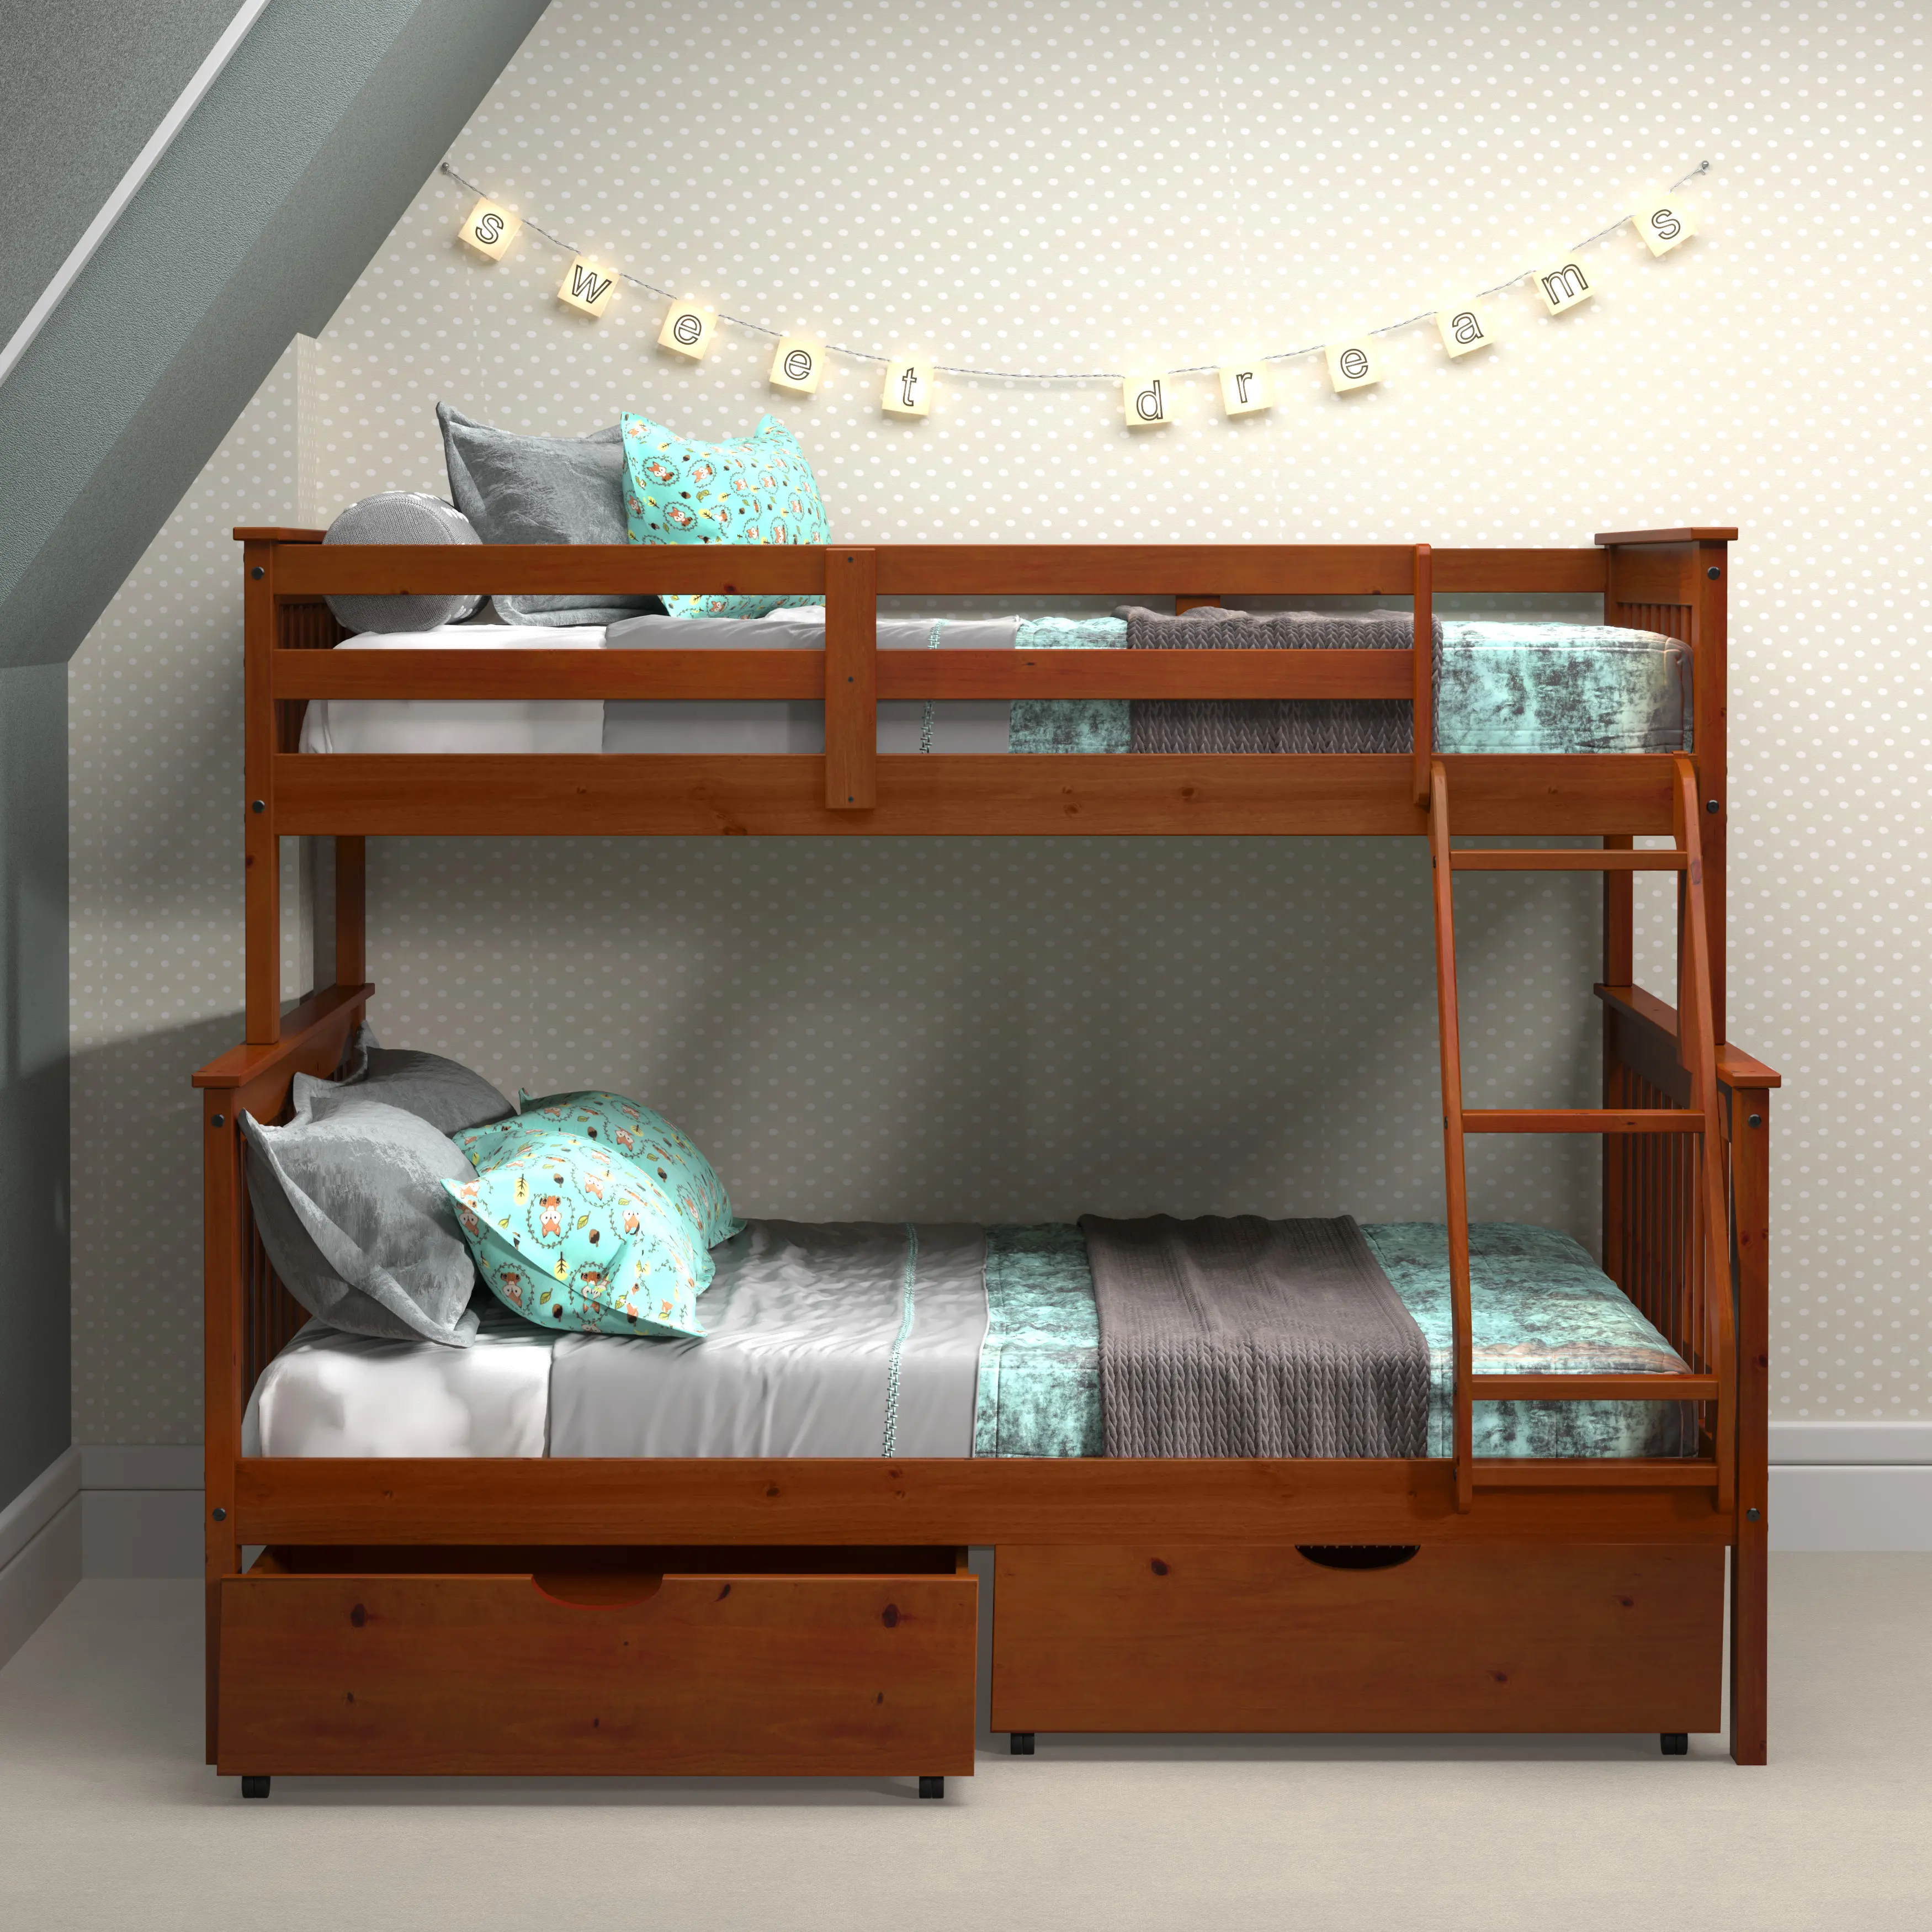 122-3-TFE505-E Brown Twin-over-Full Bunk Bed with Storage - Craft sku 122-3-TFE505-E